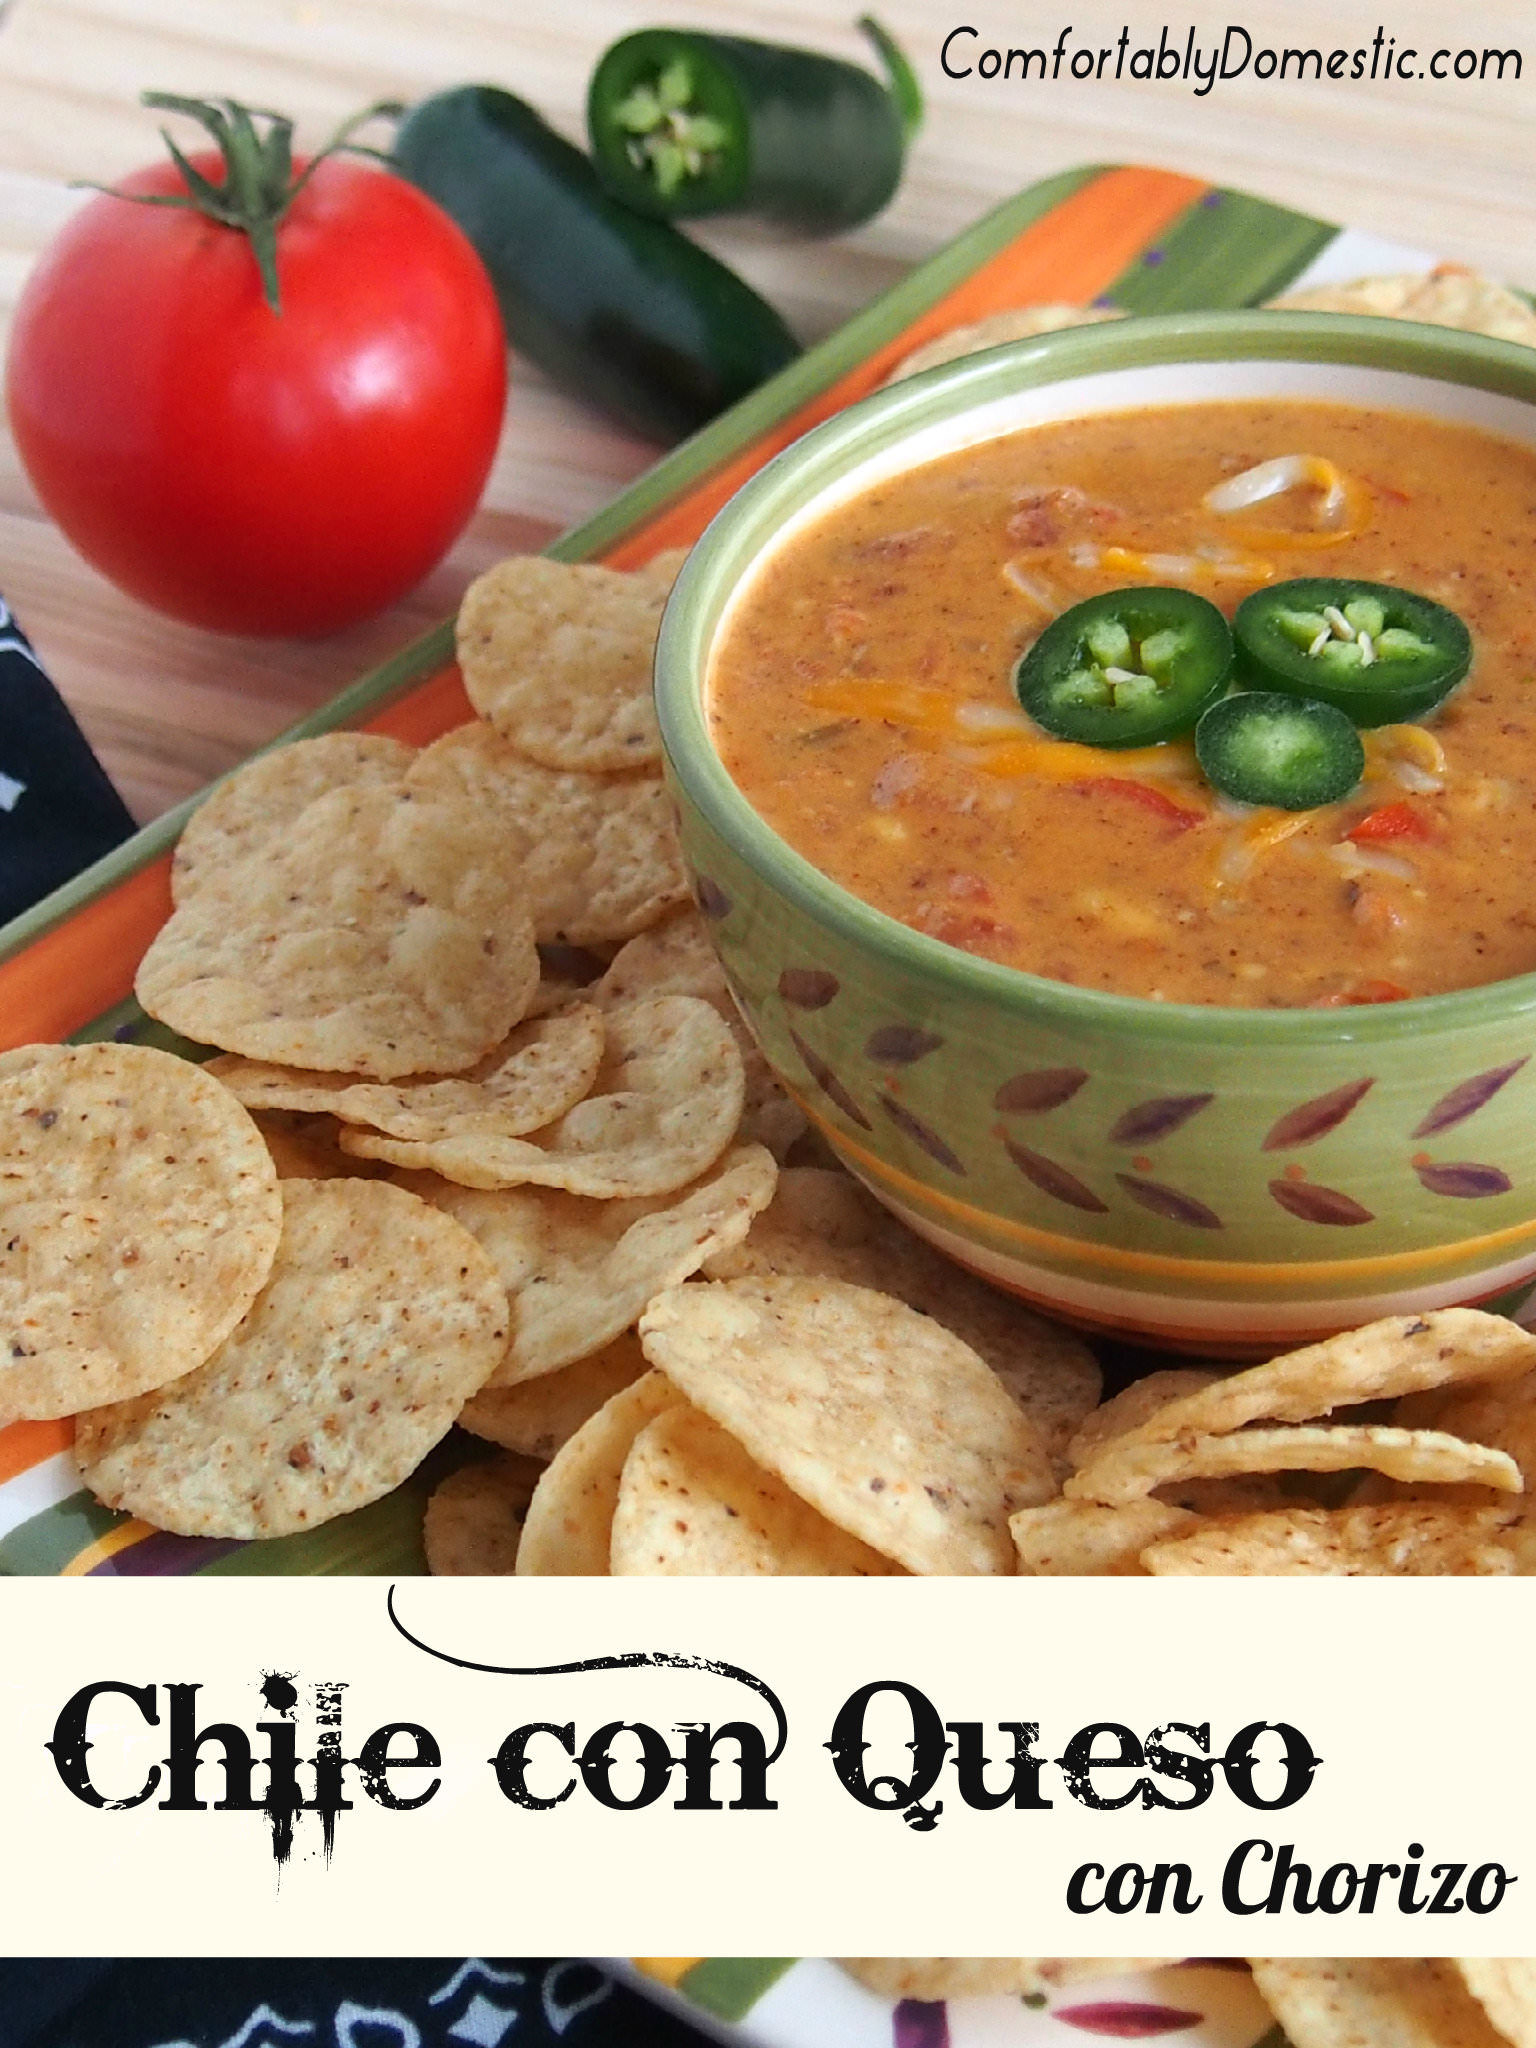 Chile con queso con chorizo is a deliciously creamy, chile-infused, Tex-Mex style cheese dip, made extra special with the addition of chorizo sausage. | ComfortablyDomestic.com